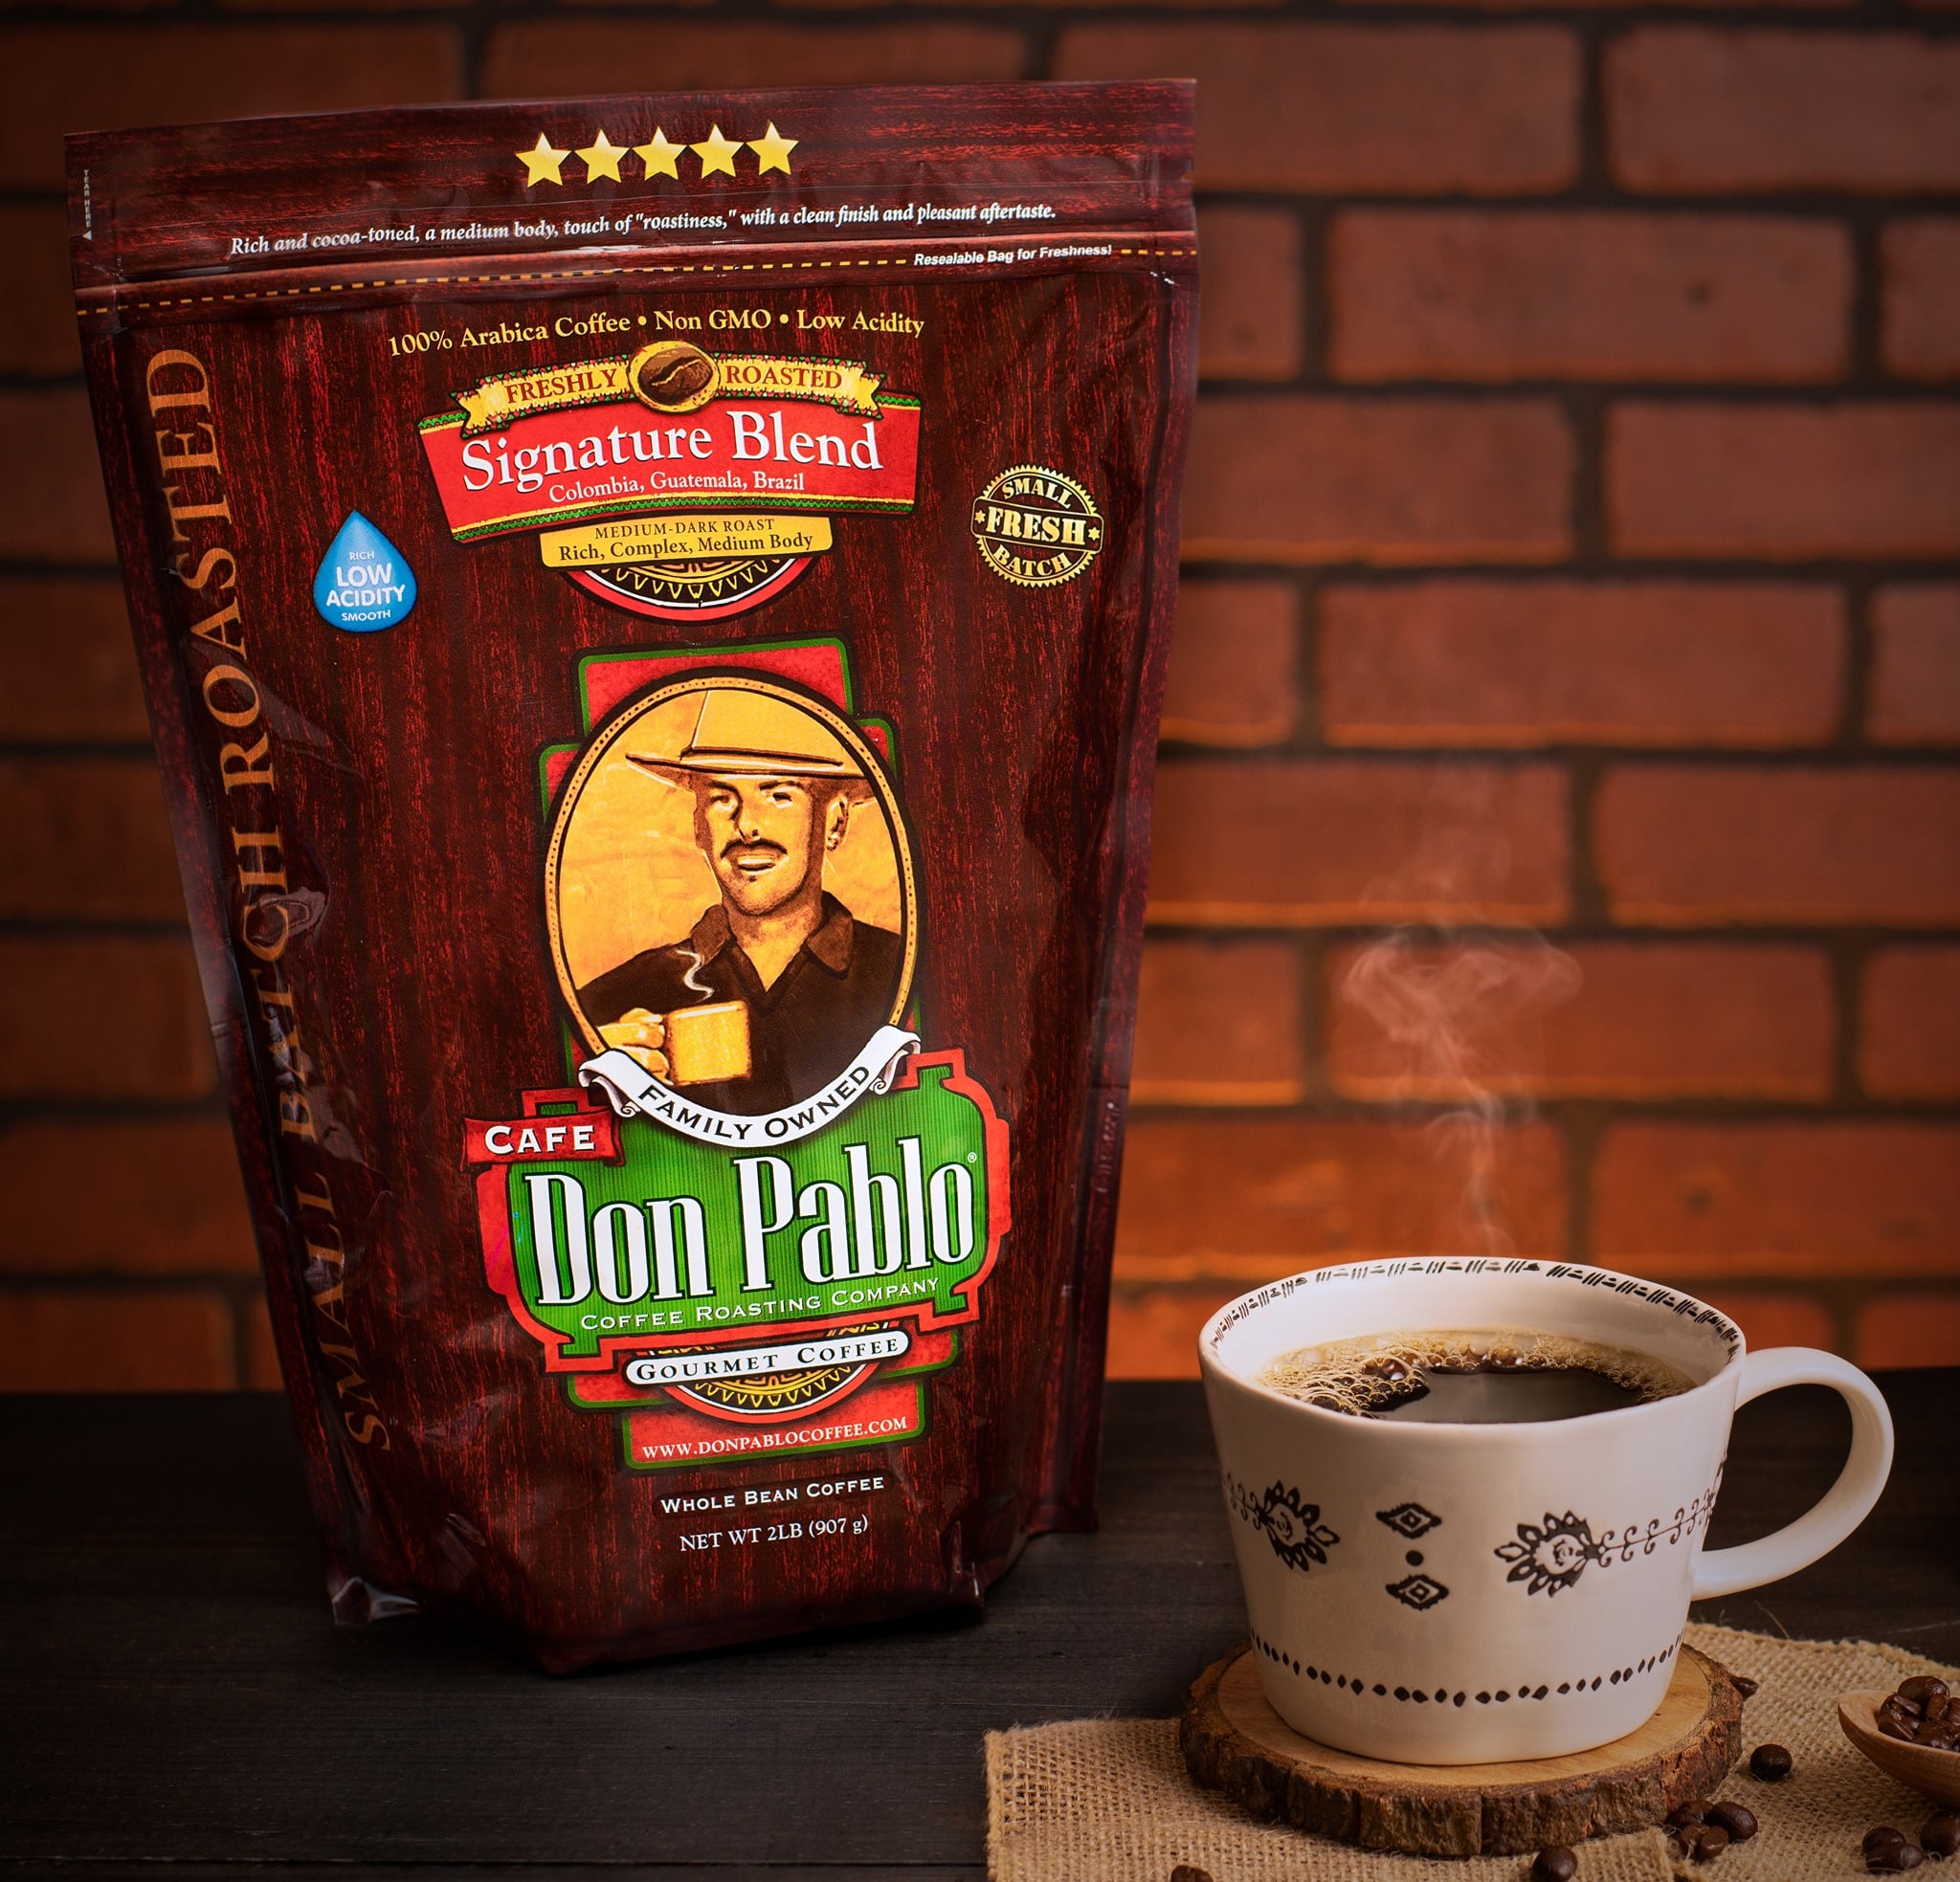 A bag of Don Pablo Signature Blend coffee beans next to a steaming mug of coffee, with a brick wall in the background.